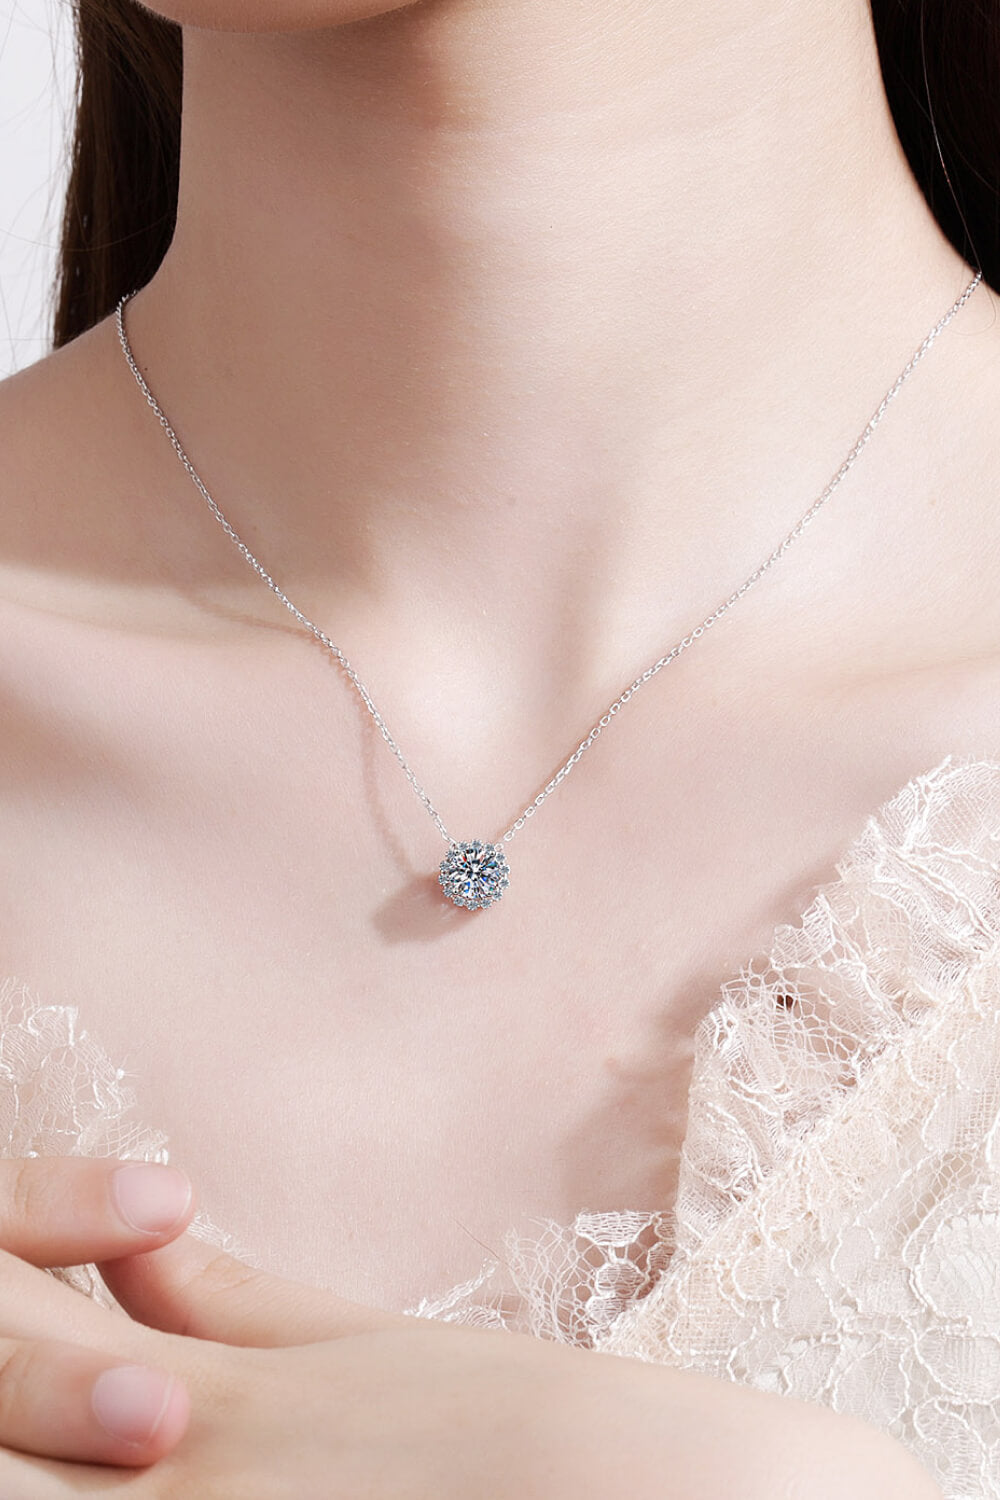 Flower-Shaped Moissanite Pendant Necklace - Necklaces - FITGGINS